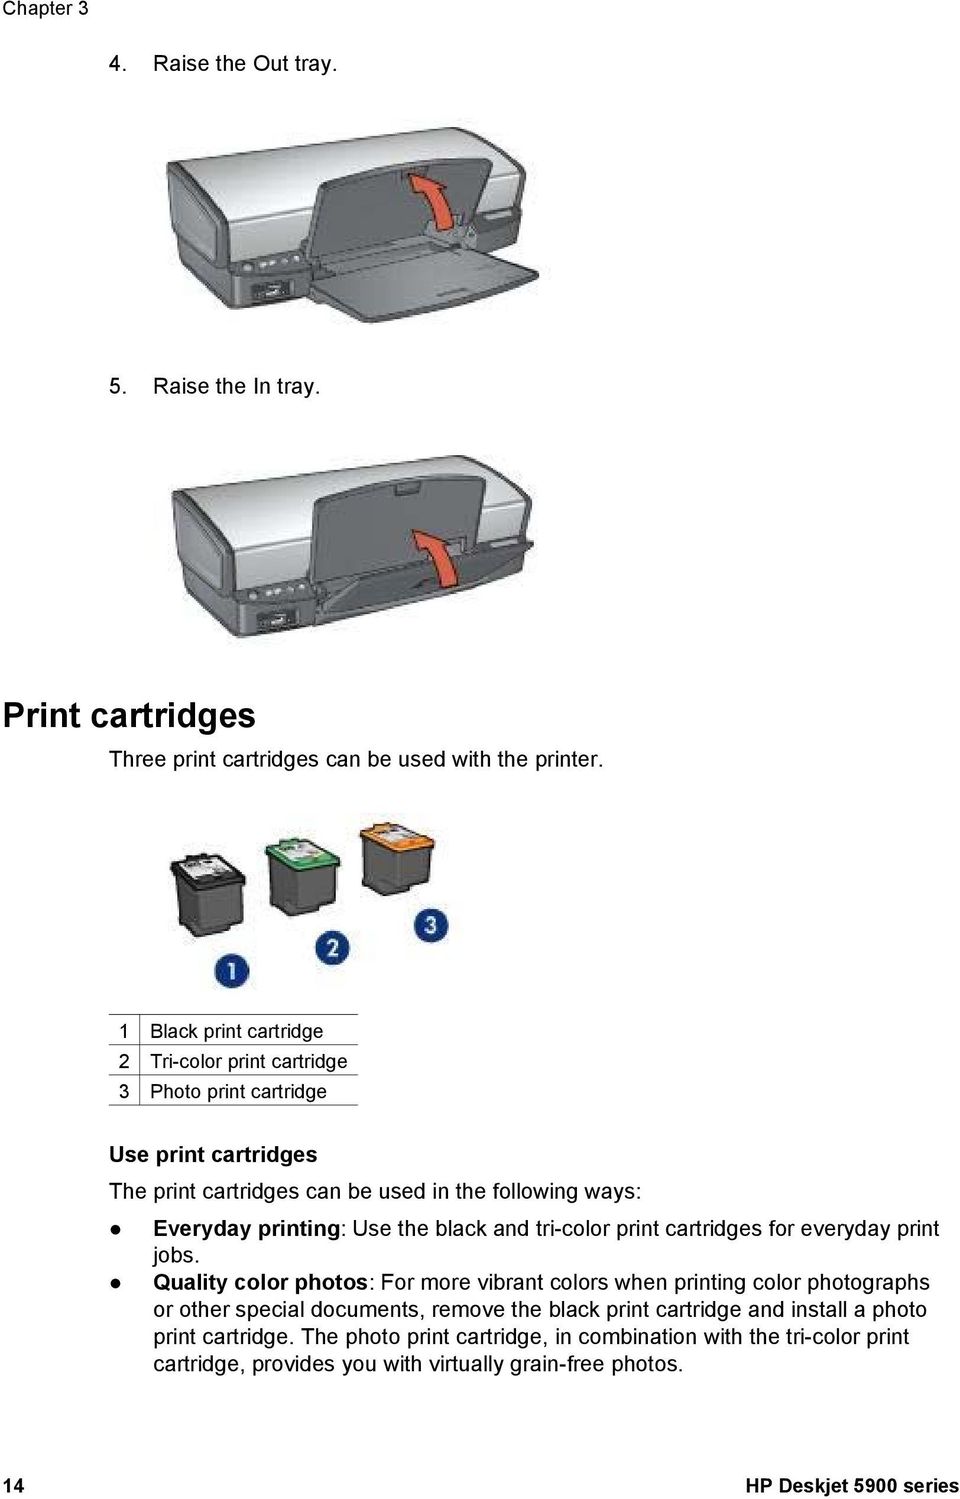 Use the black and tri-color print cartridges for everyday print jobs.